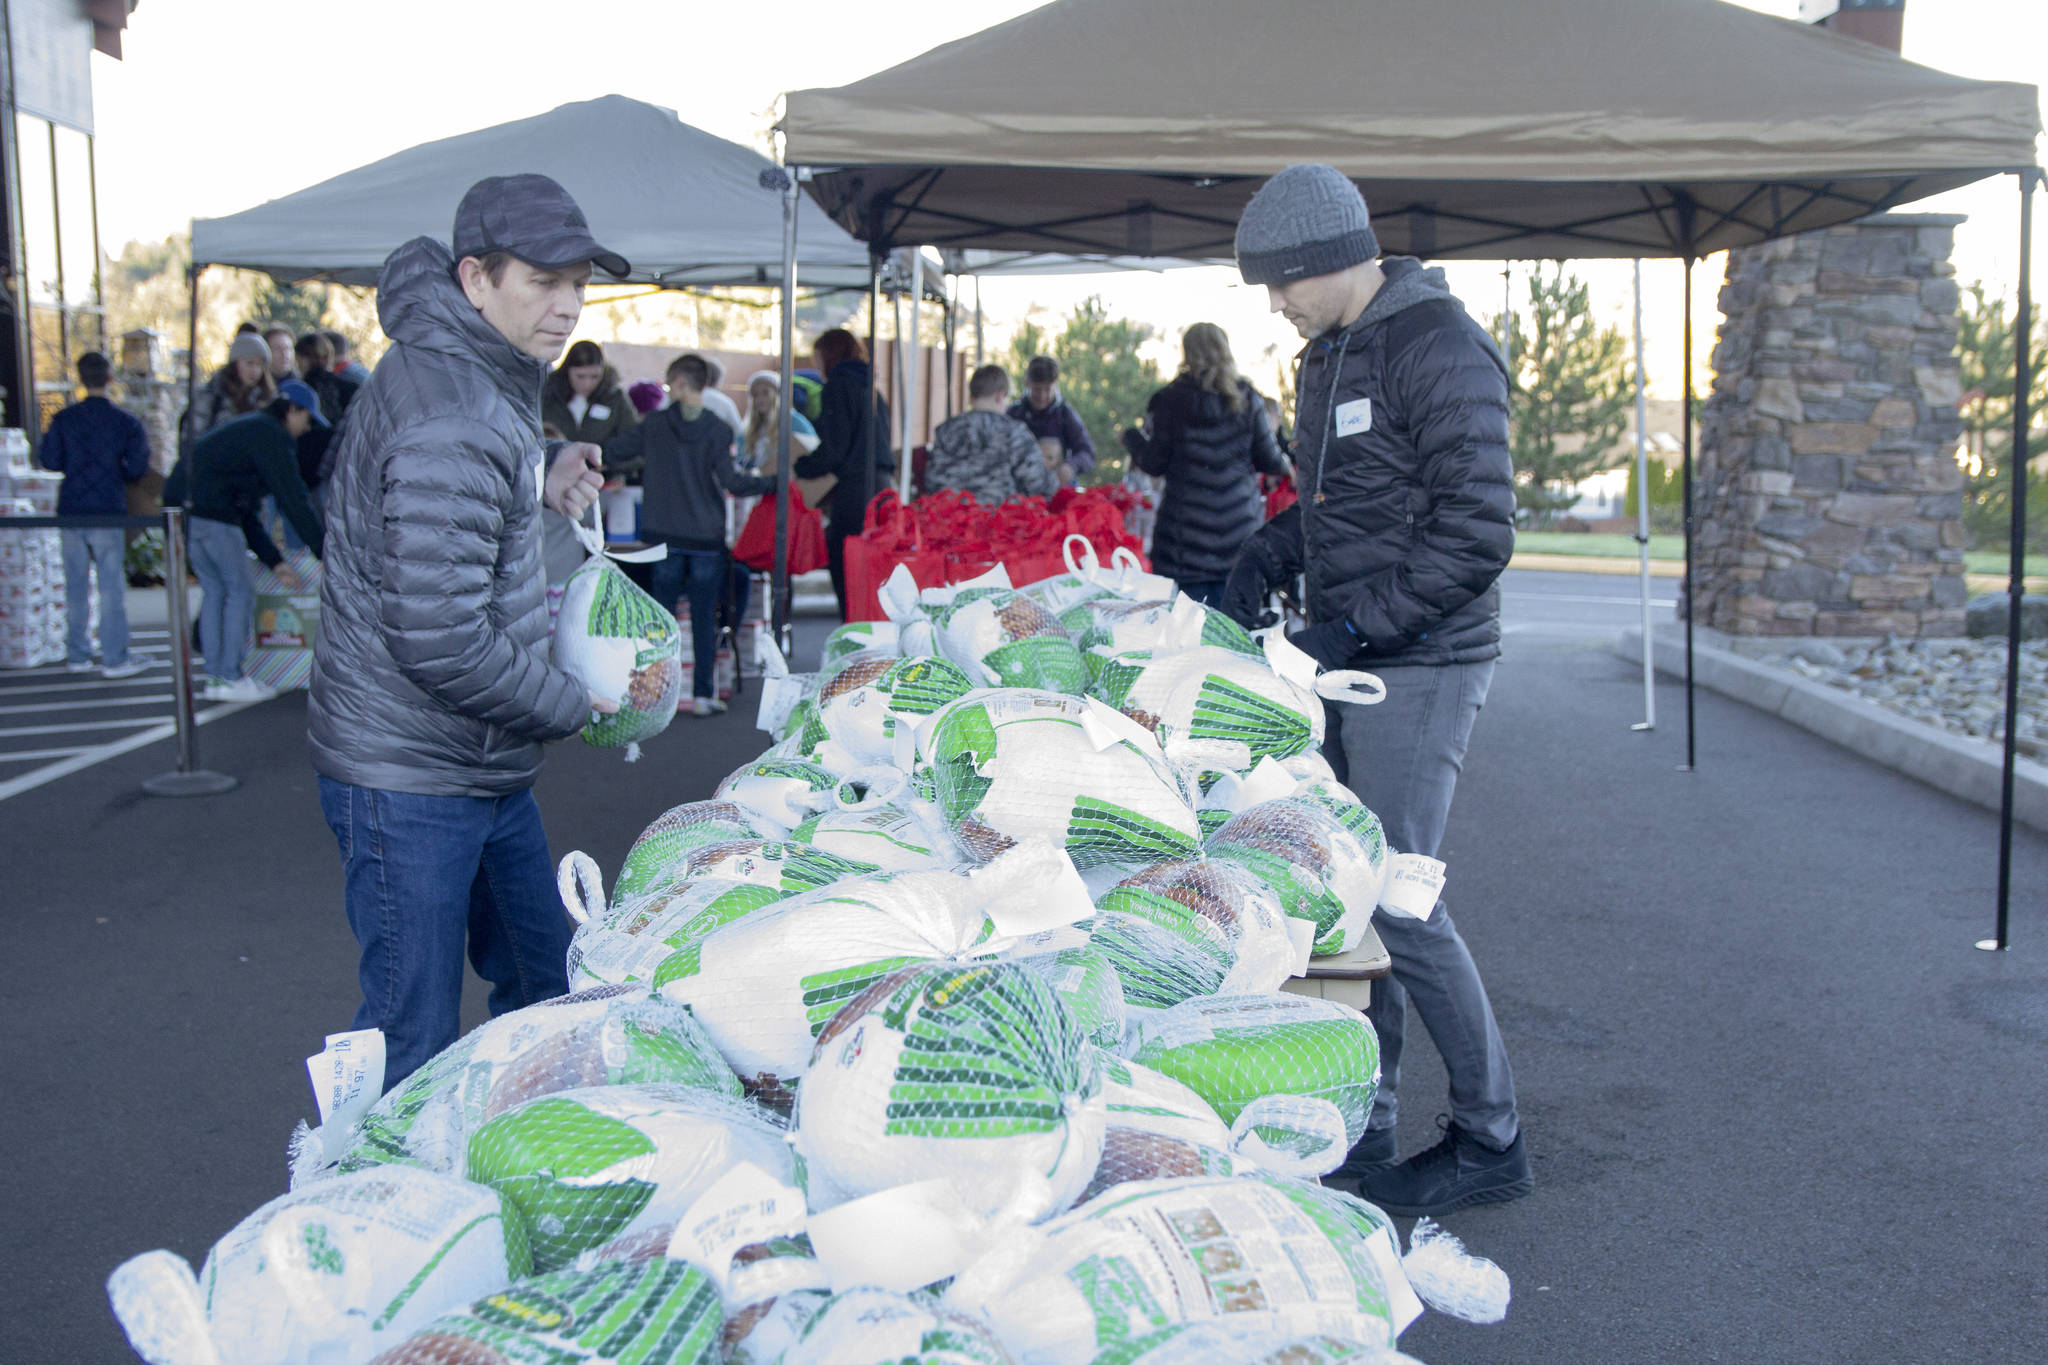 Eastridge Church gives away more than 1,000 turkeys to the community at their Seattle and Issaquah locations each year. The 2019 event will take place Nov. 23. Courtesy photo